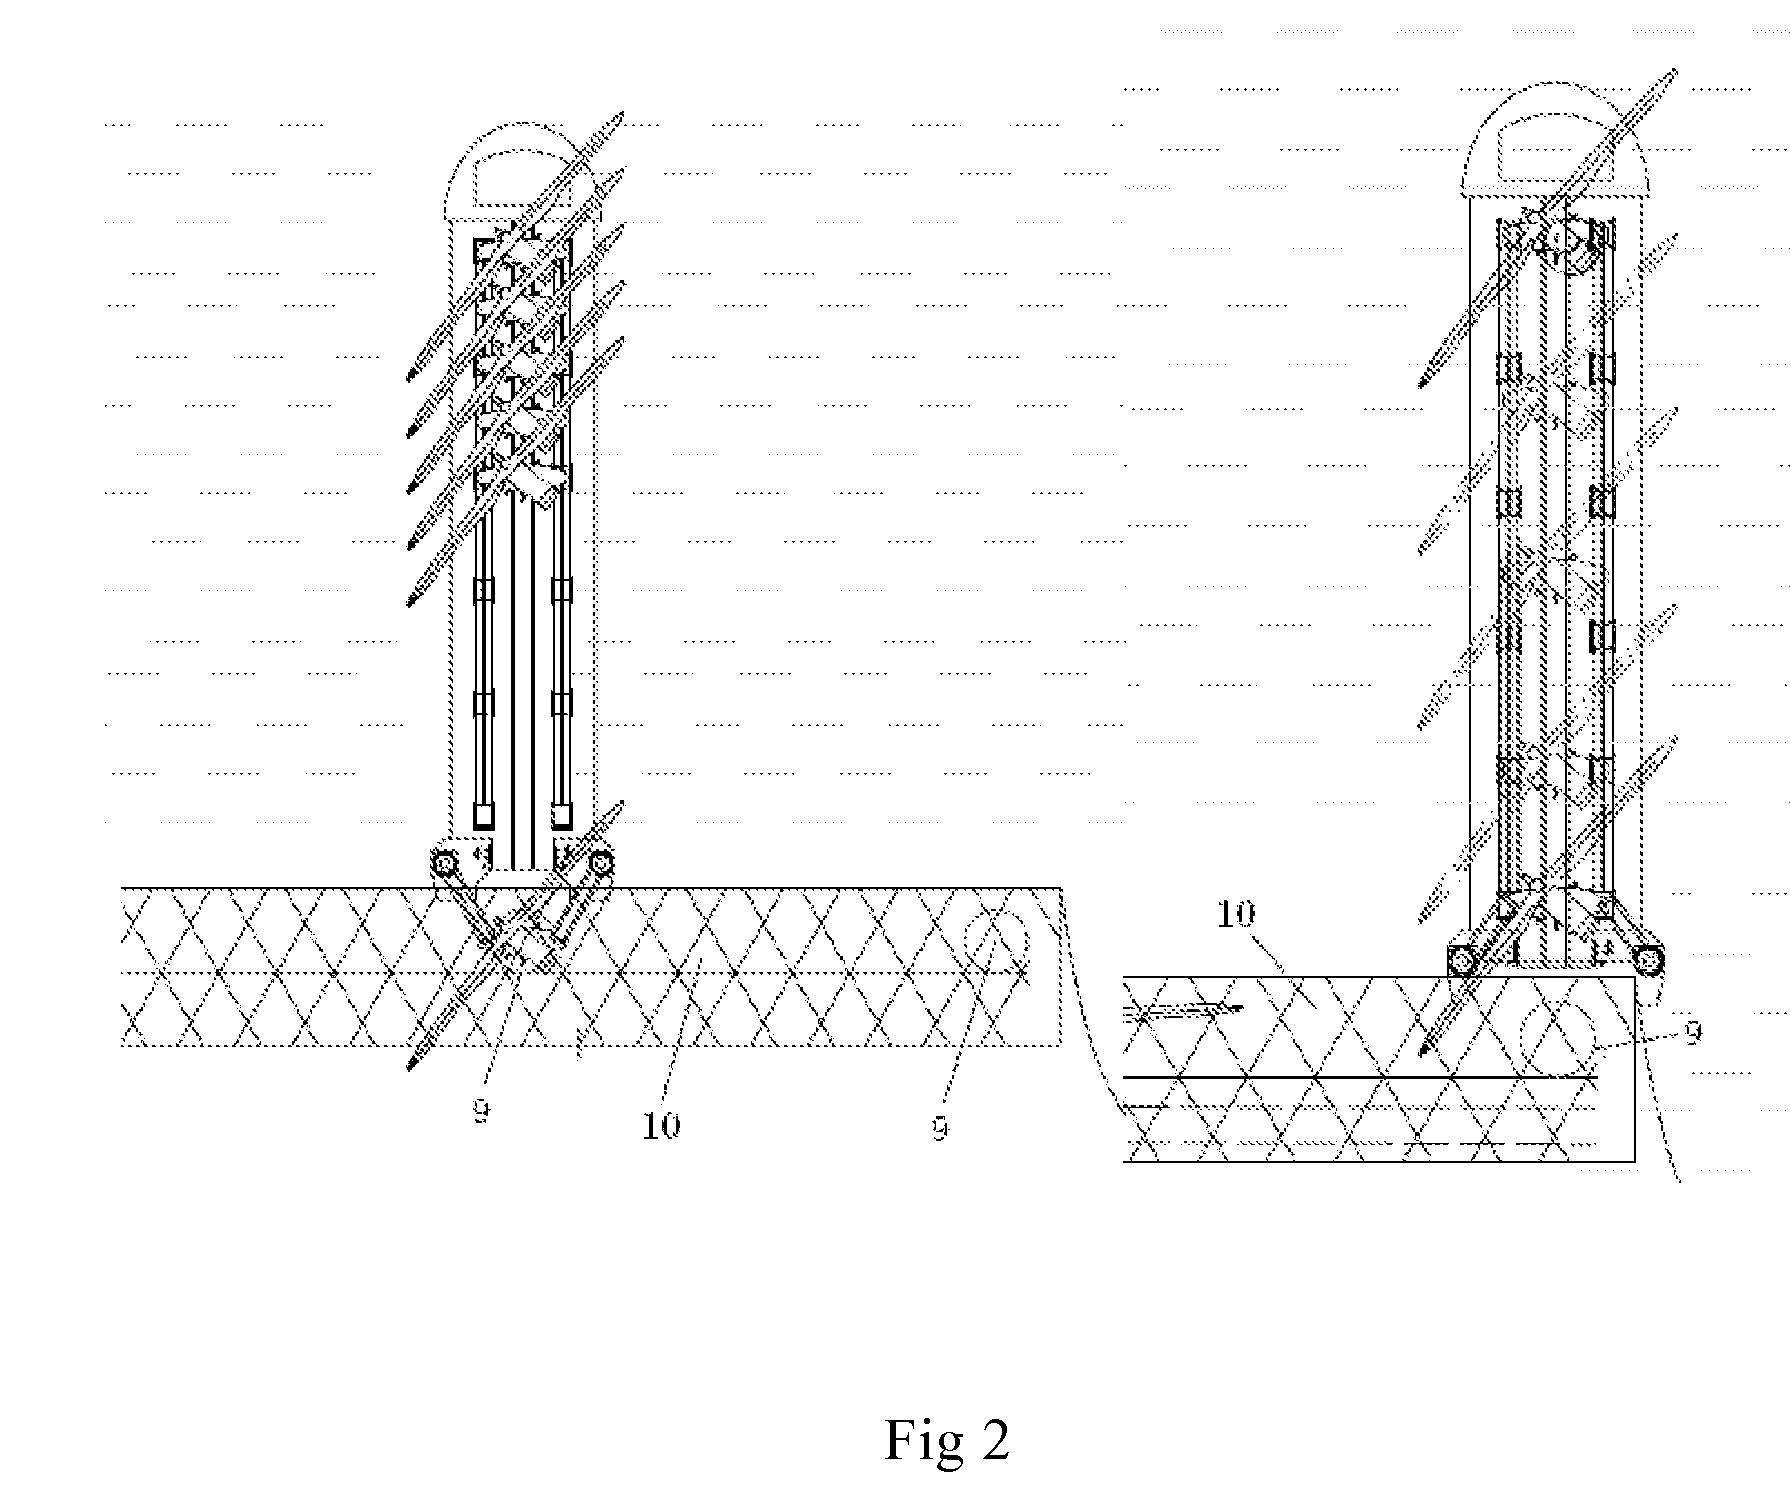 Vessel and method for transporting and hoisting the offshore wind turbine generator system